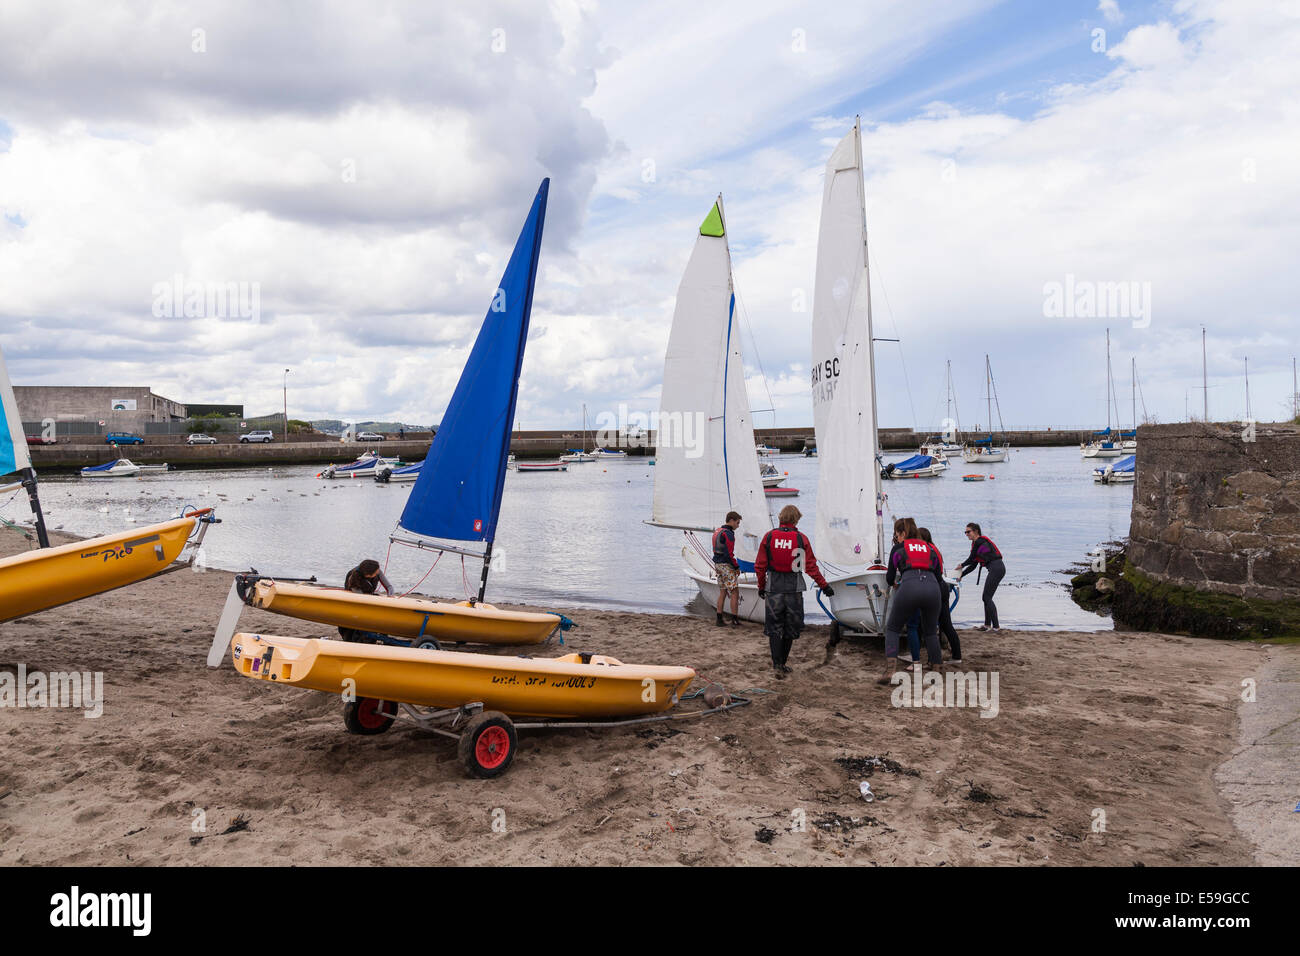 Sailing school students launching a sailboat for a lesson from Bray, County Wicklow, Ireland. Stock Photo